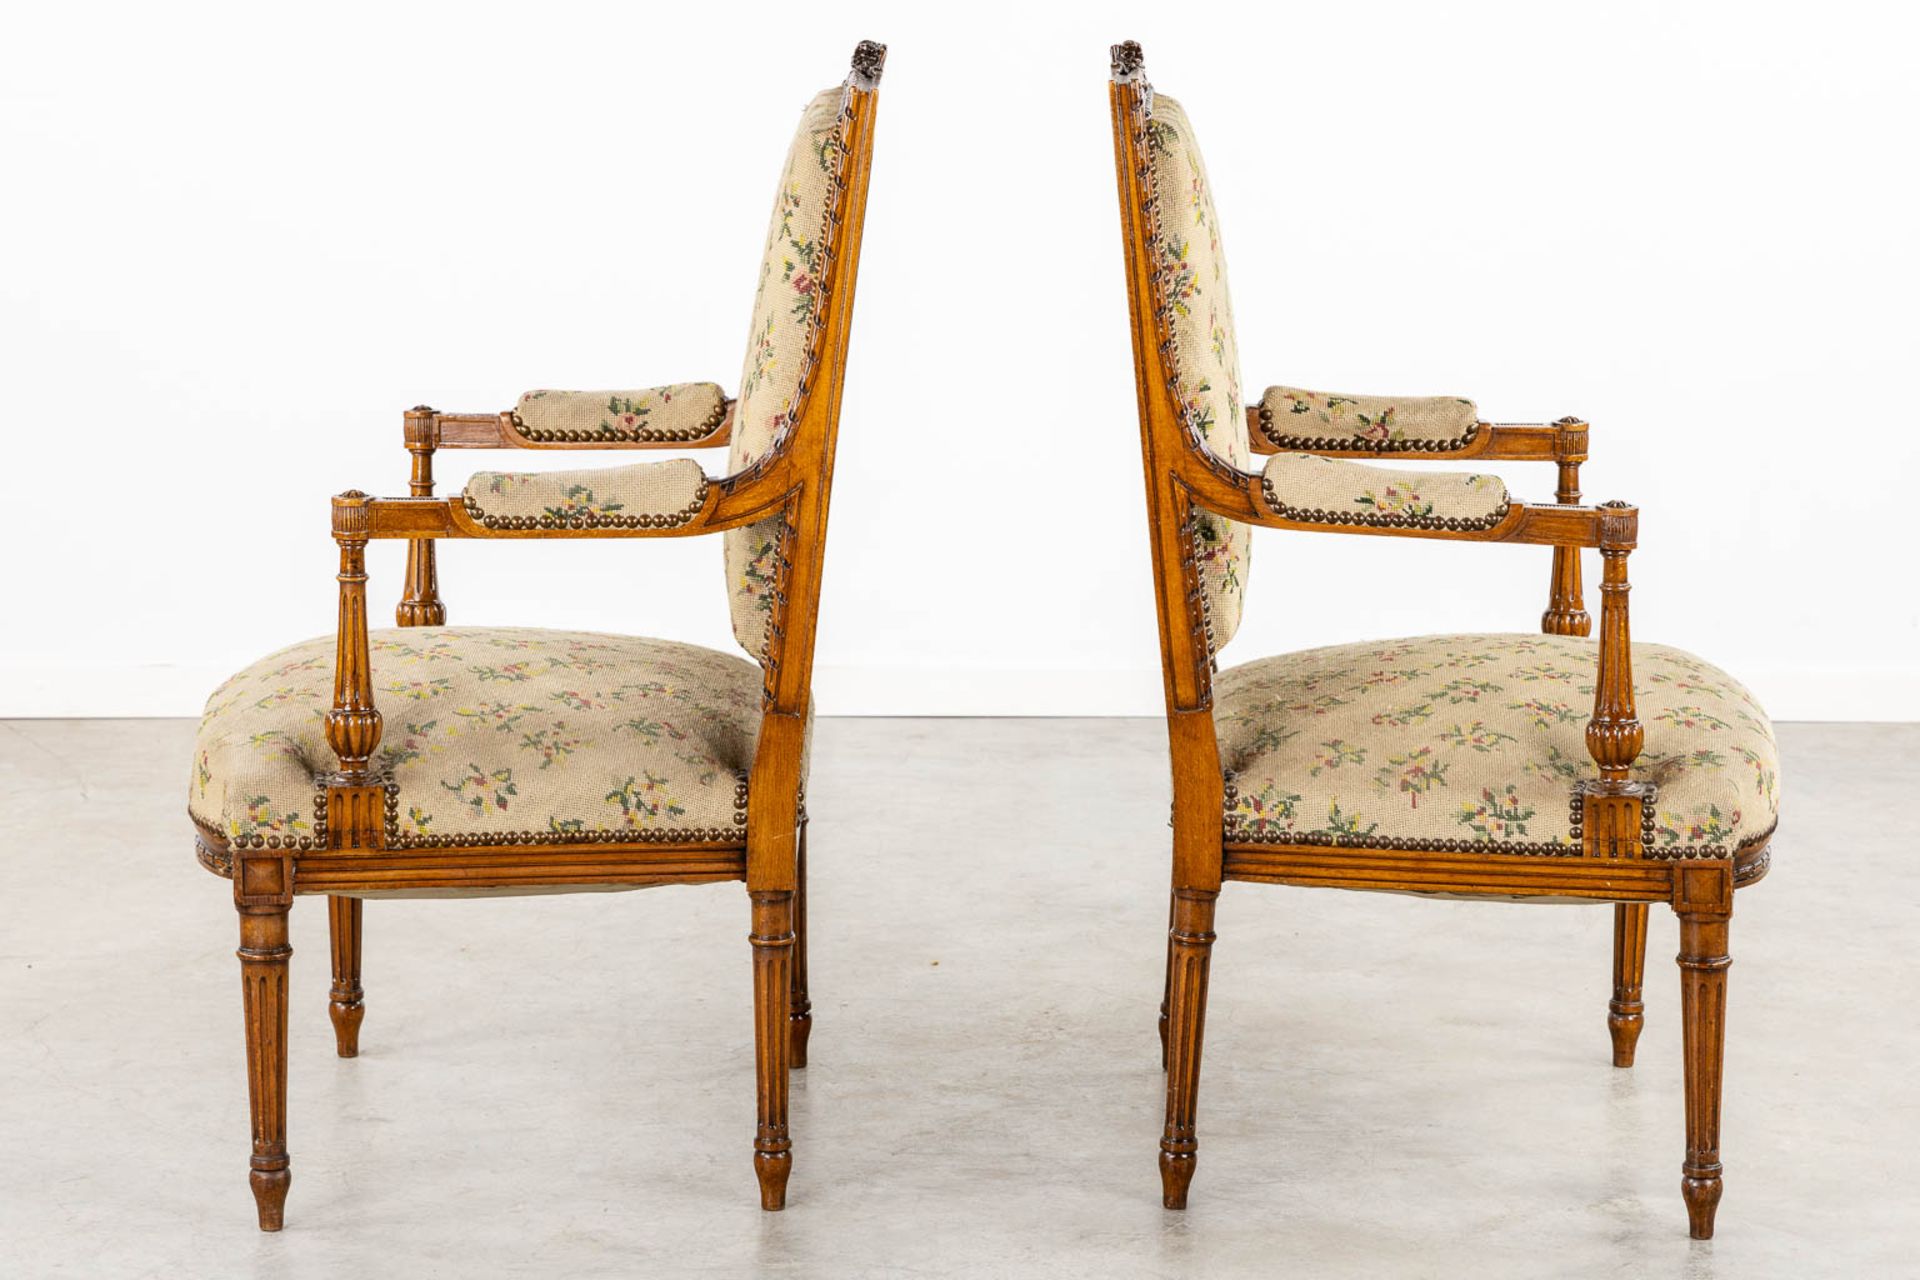 A pair of wood-sculptured armchairs with emboidered upholstry. Louis XVI style. (L:62 x W:64 x H:100 - Bild 4 aus 11